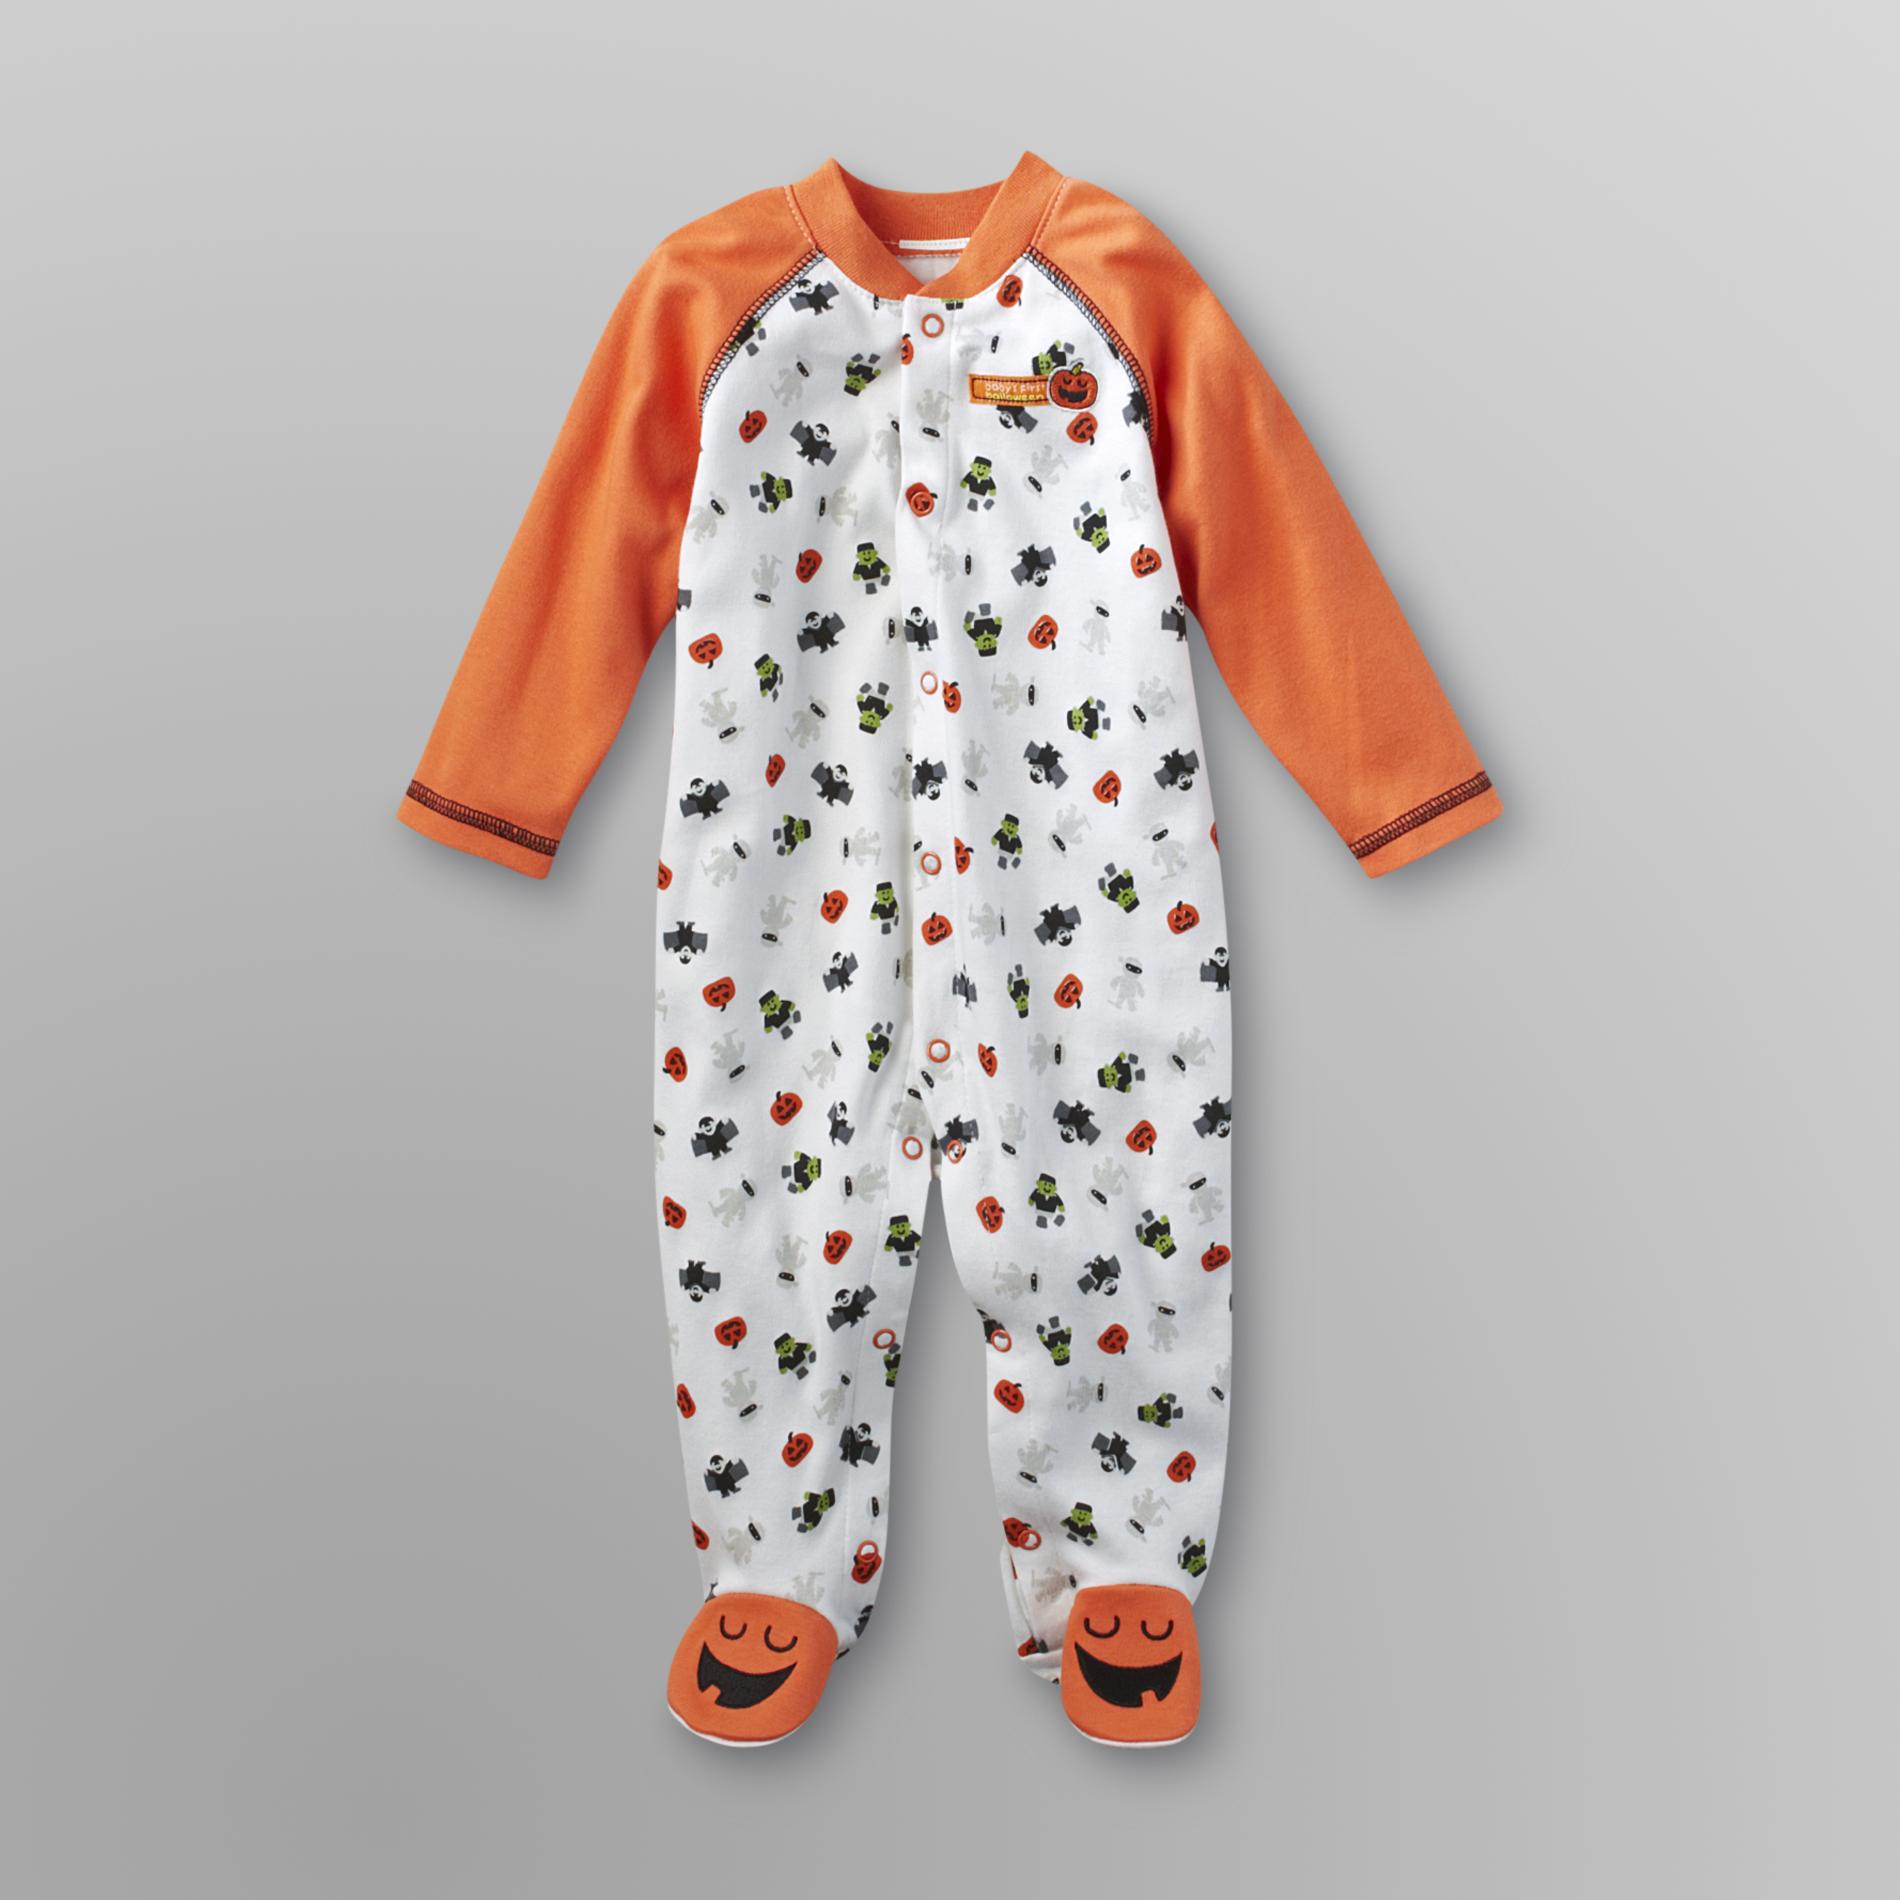 Small Wonders Infant Boy's Ruffled Footed Sleeper - Baby's First Halloween